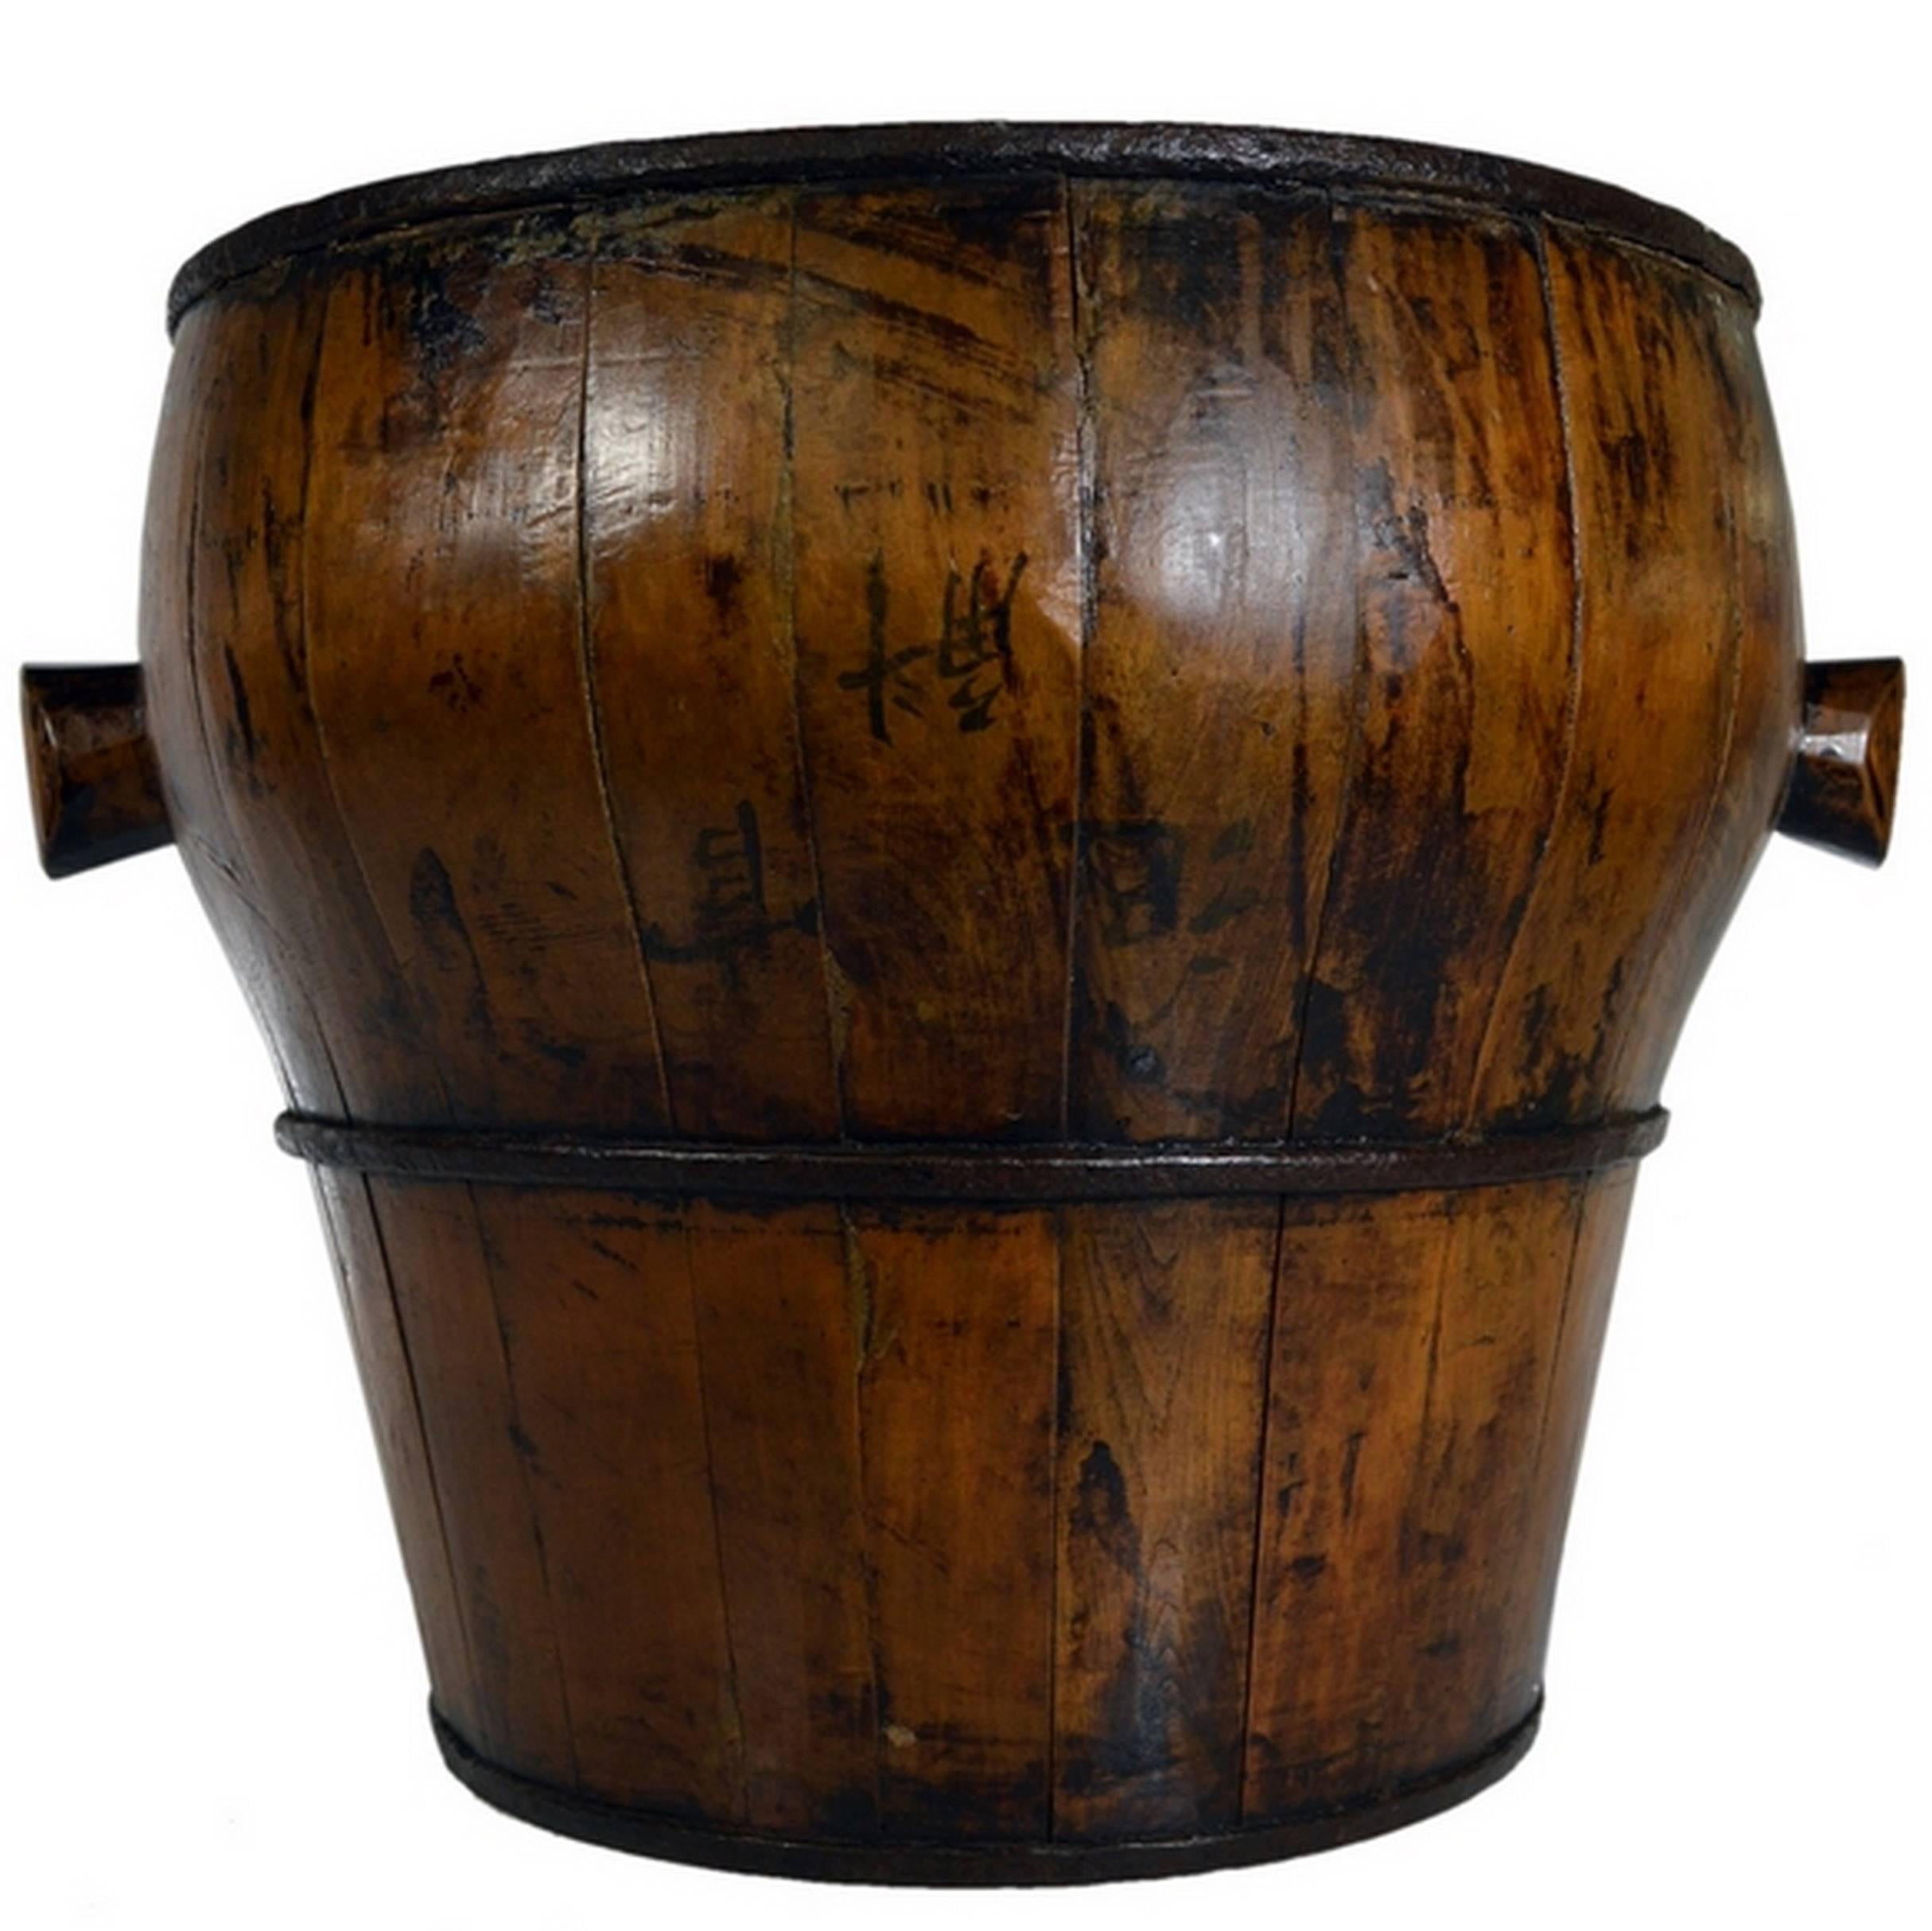 Antique Handmade Drum-Shaped Varnished Grain Basket from 19th Century, China